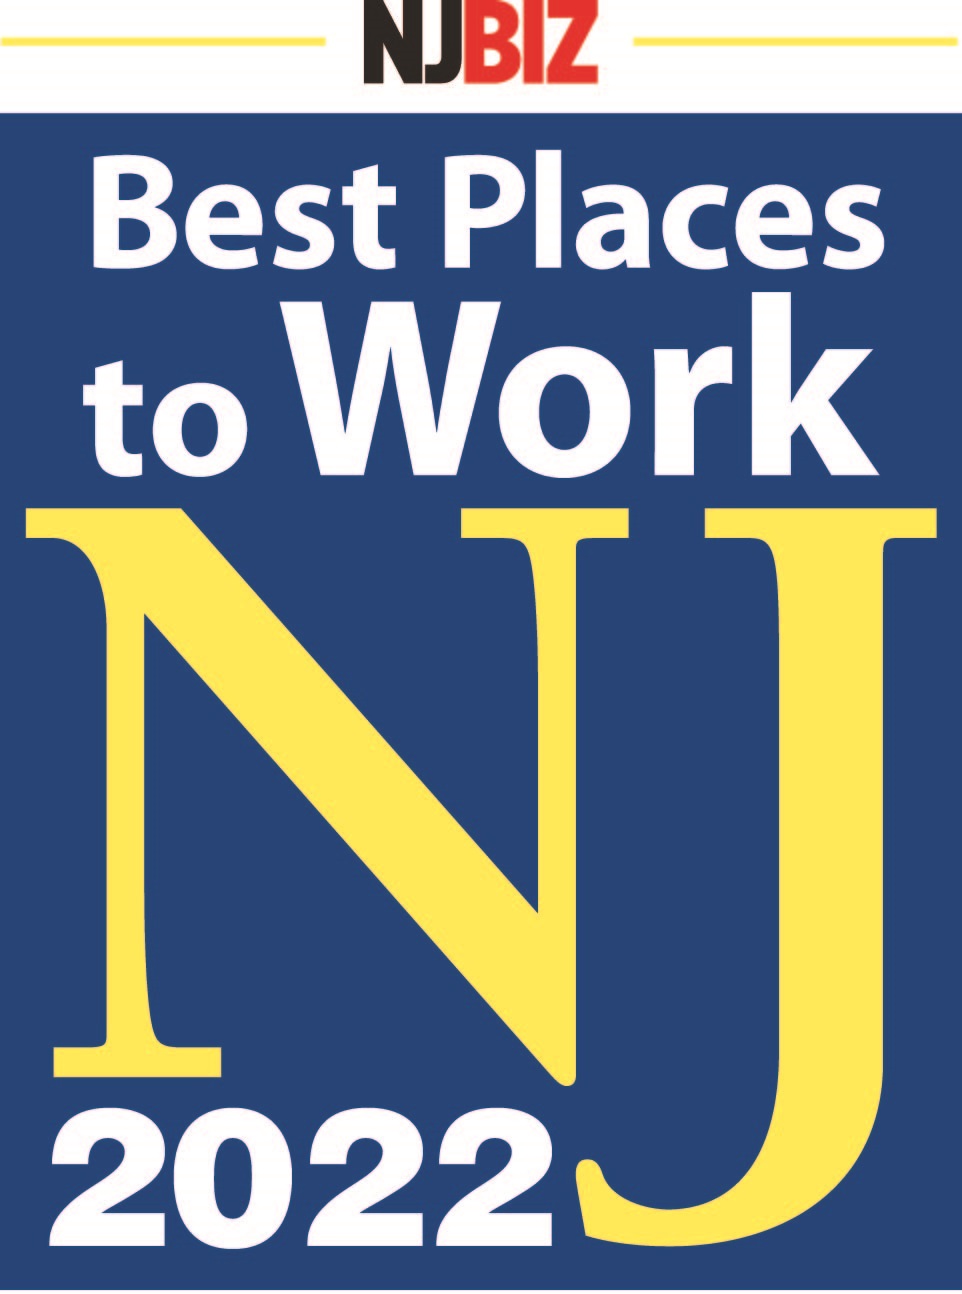 Best Places to Work NJ 2022